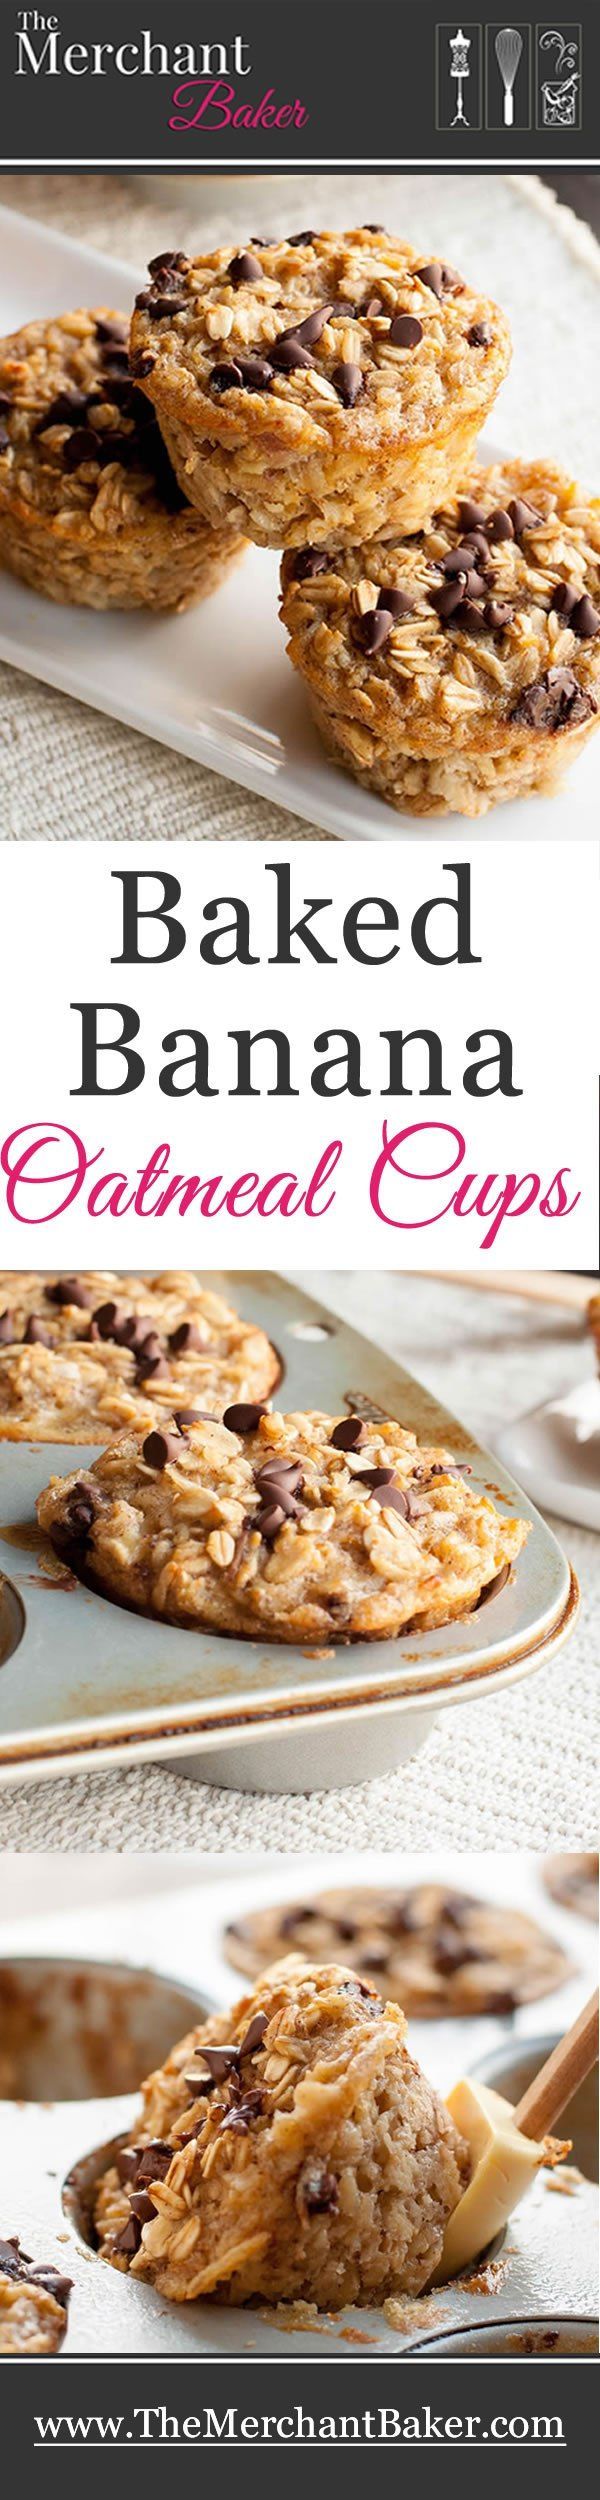 Baked Banana Oatmeal Cups. A hearty and healthy oatmeal that you can make ahead. Baked in individual cups